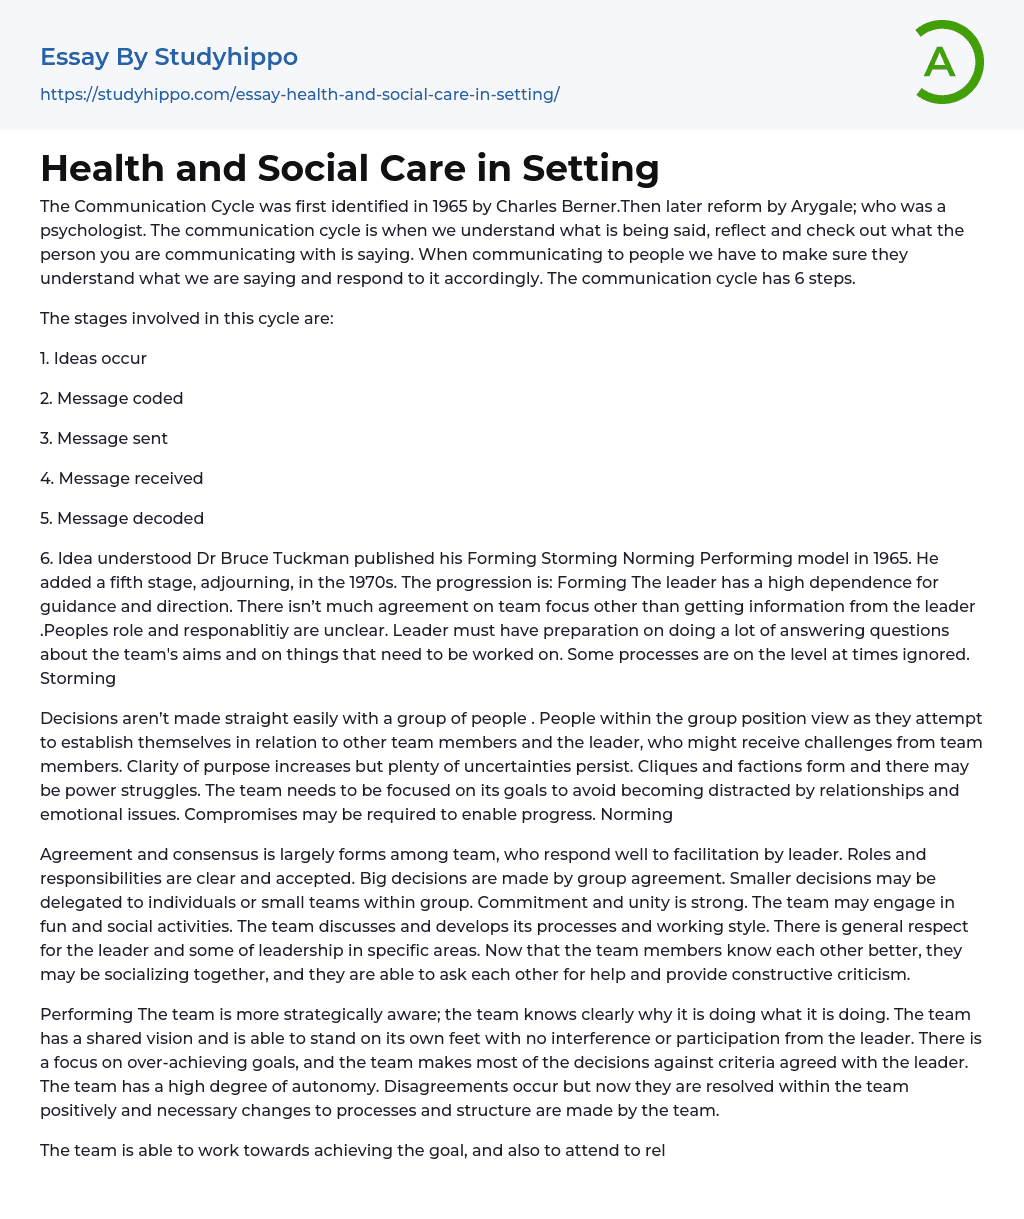 dissertation examples health social care